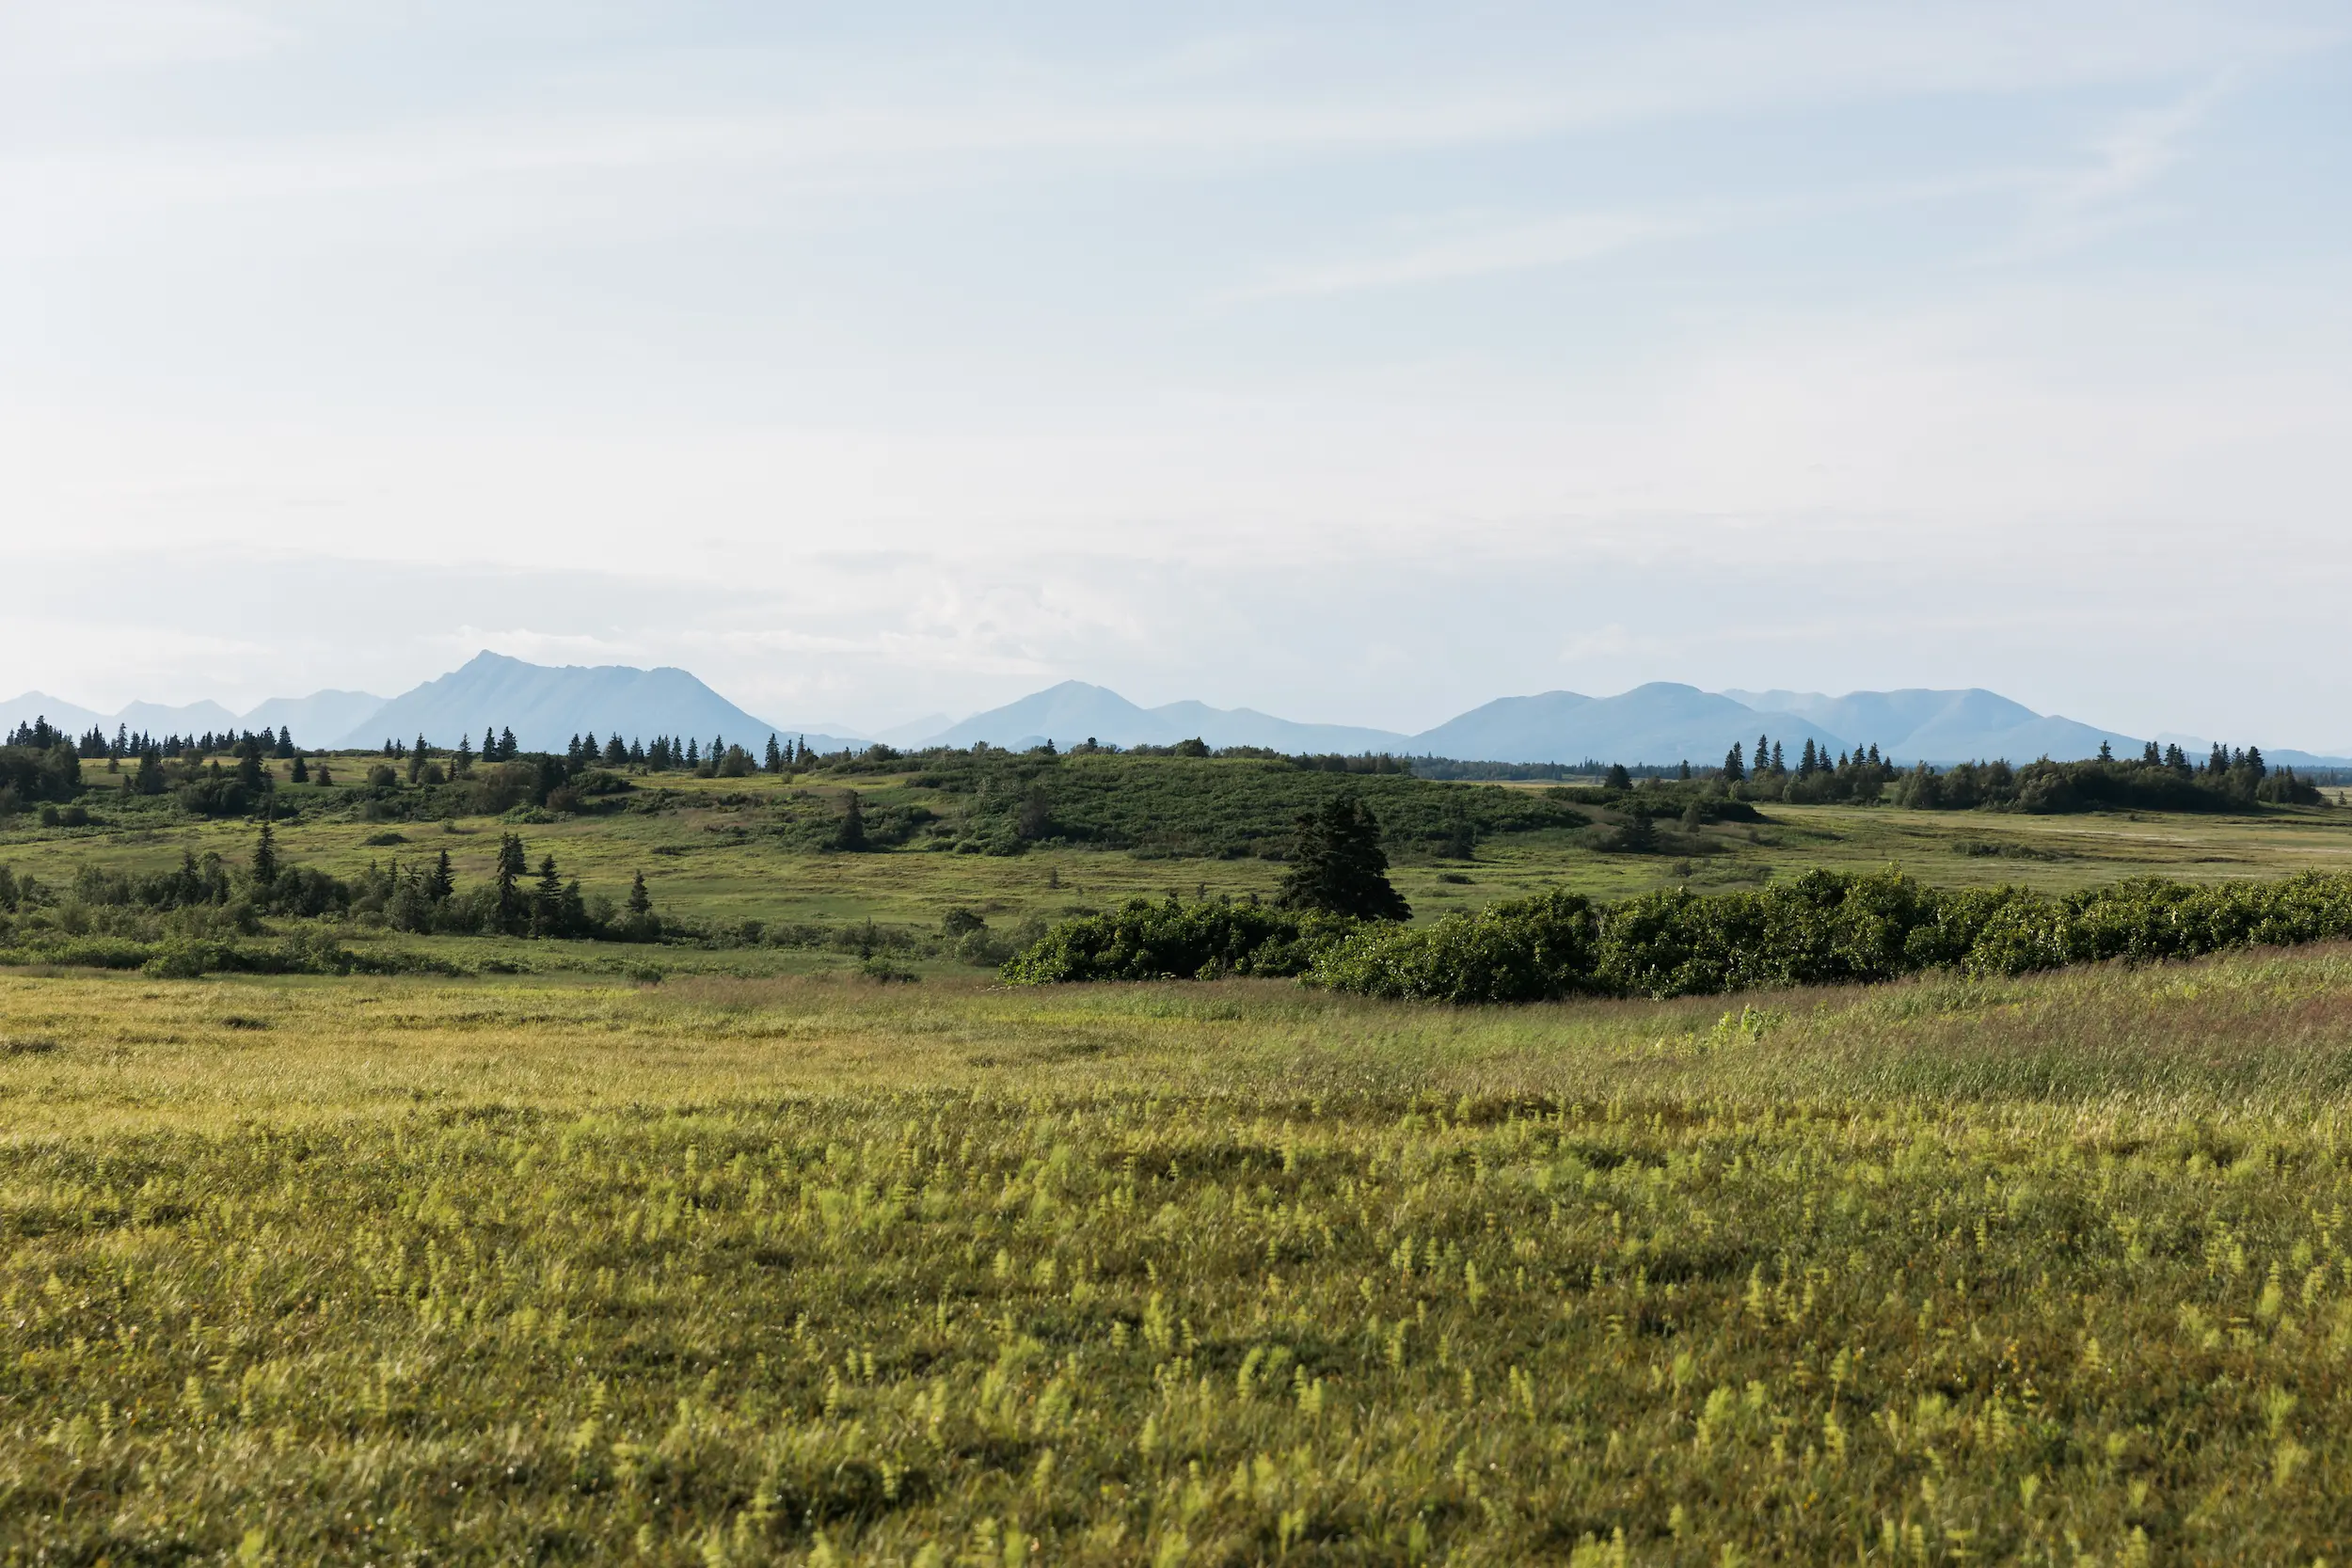 Expansive rural landscape with lush green fields under a hazy sky, with distant mountain silhouettes on the horizon